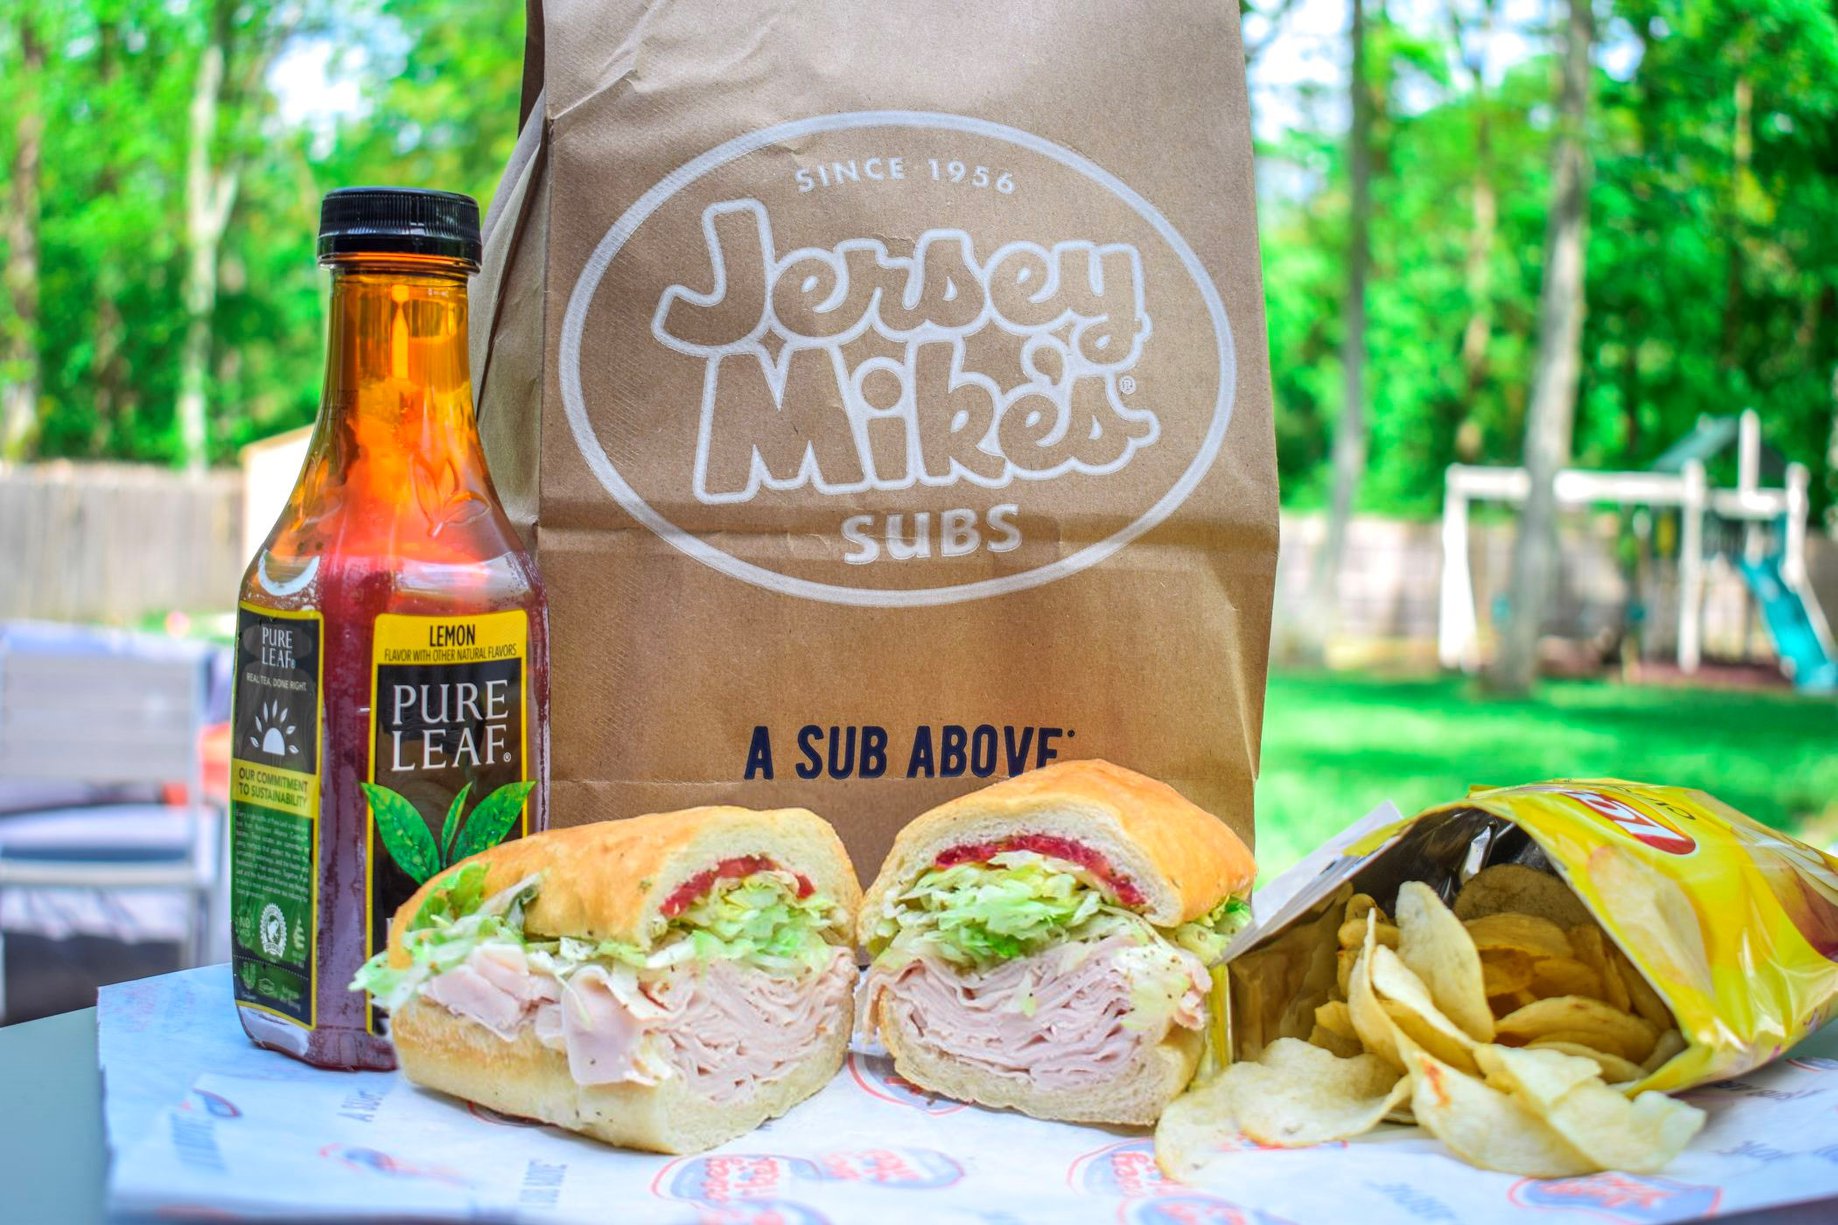 jersey mike's logo and take out bag